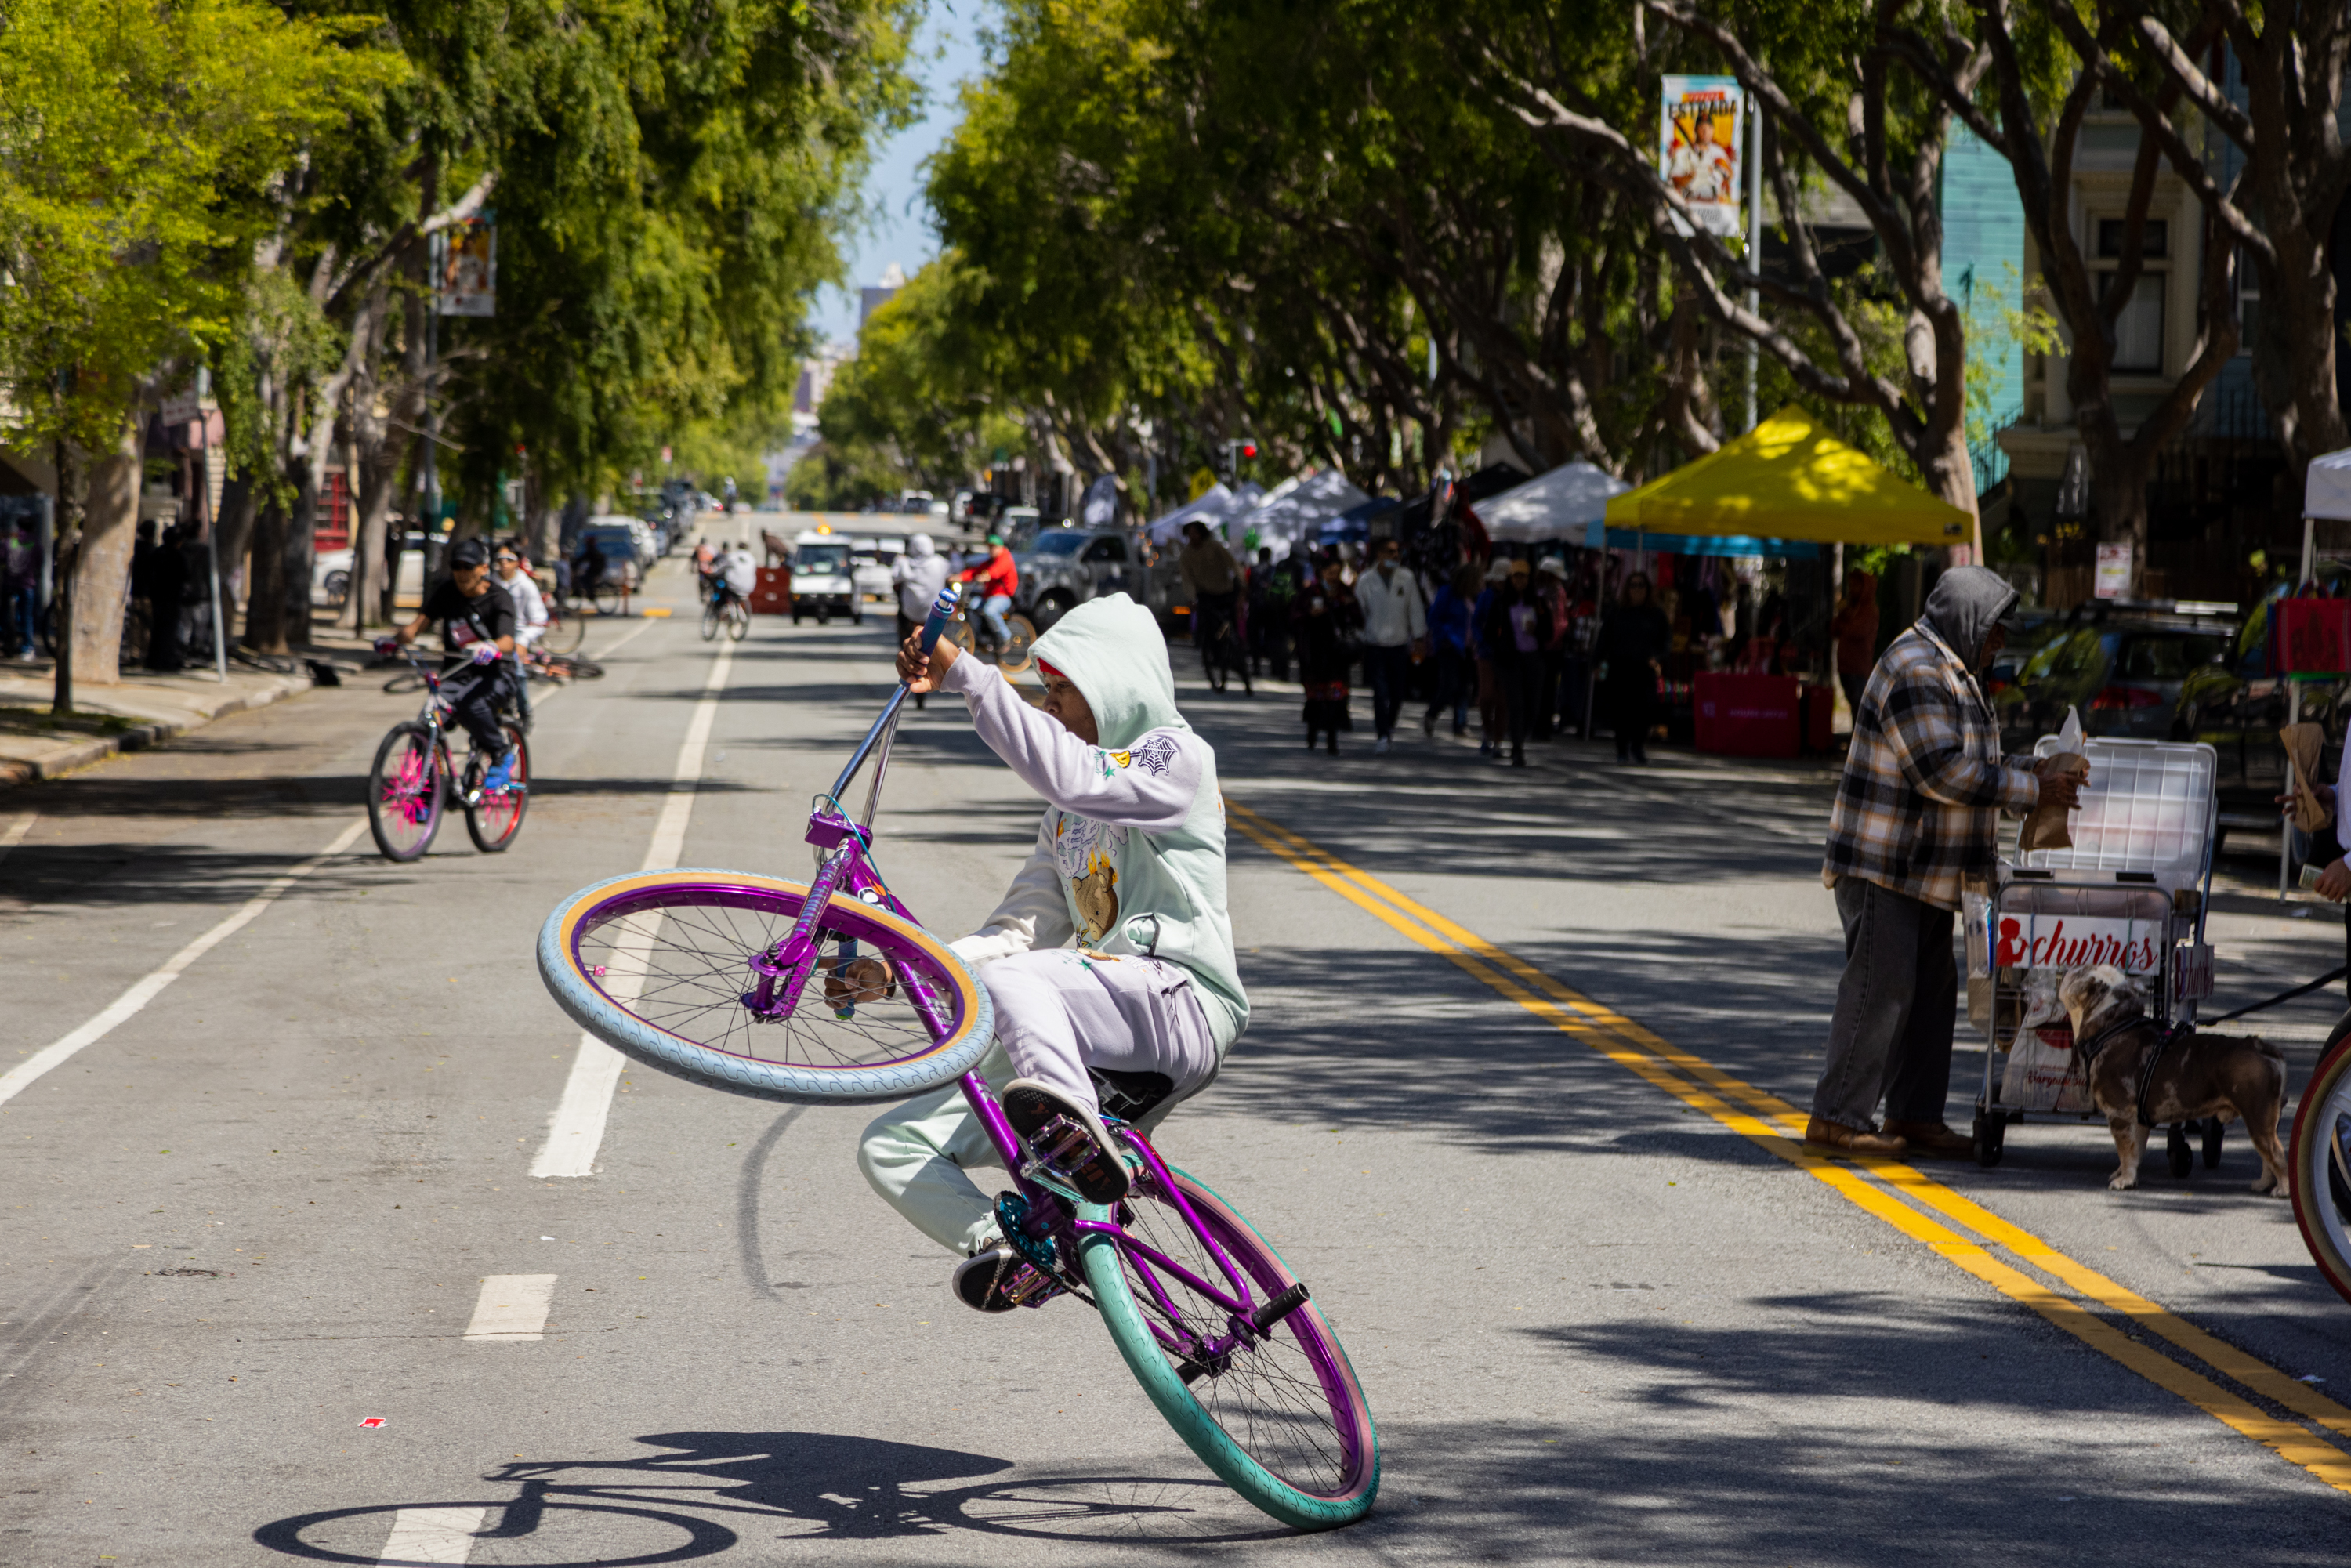 A person is performing a wheelie on a colorful bike down a sunny, tree-lined street with bystanders and stalls.